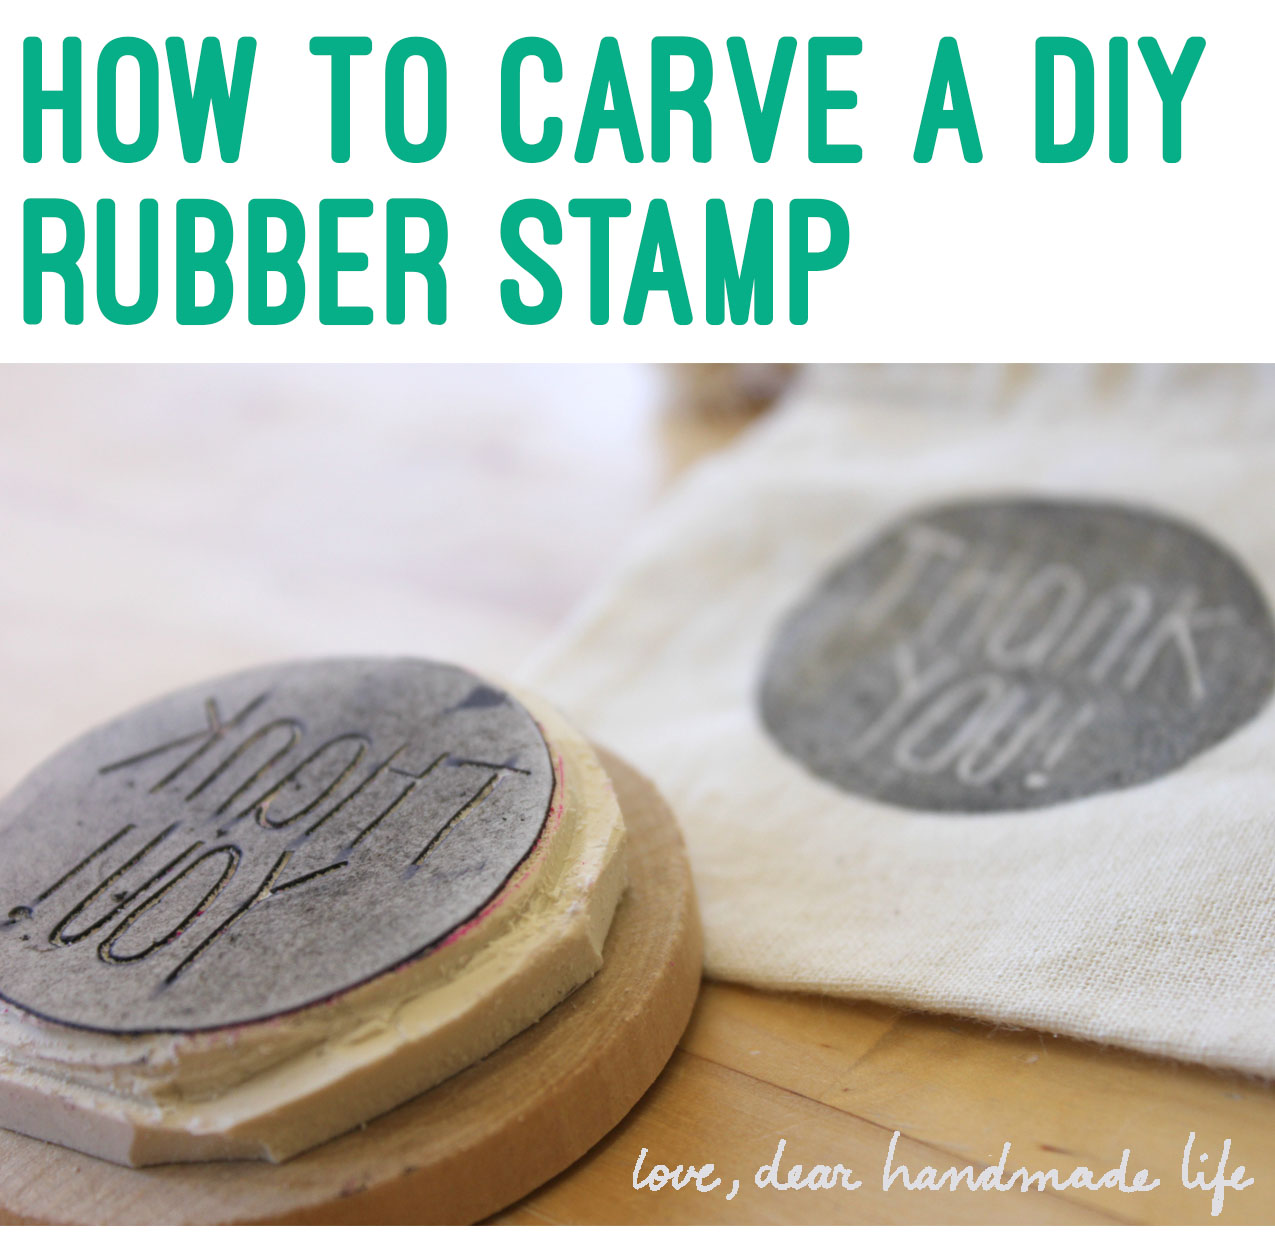 2-how-to-carve-rubber-stamp-dear-handmade-life